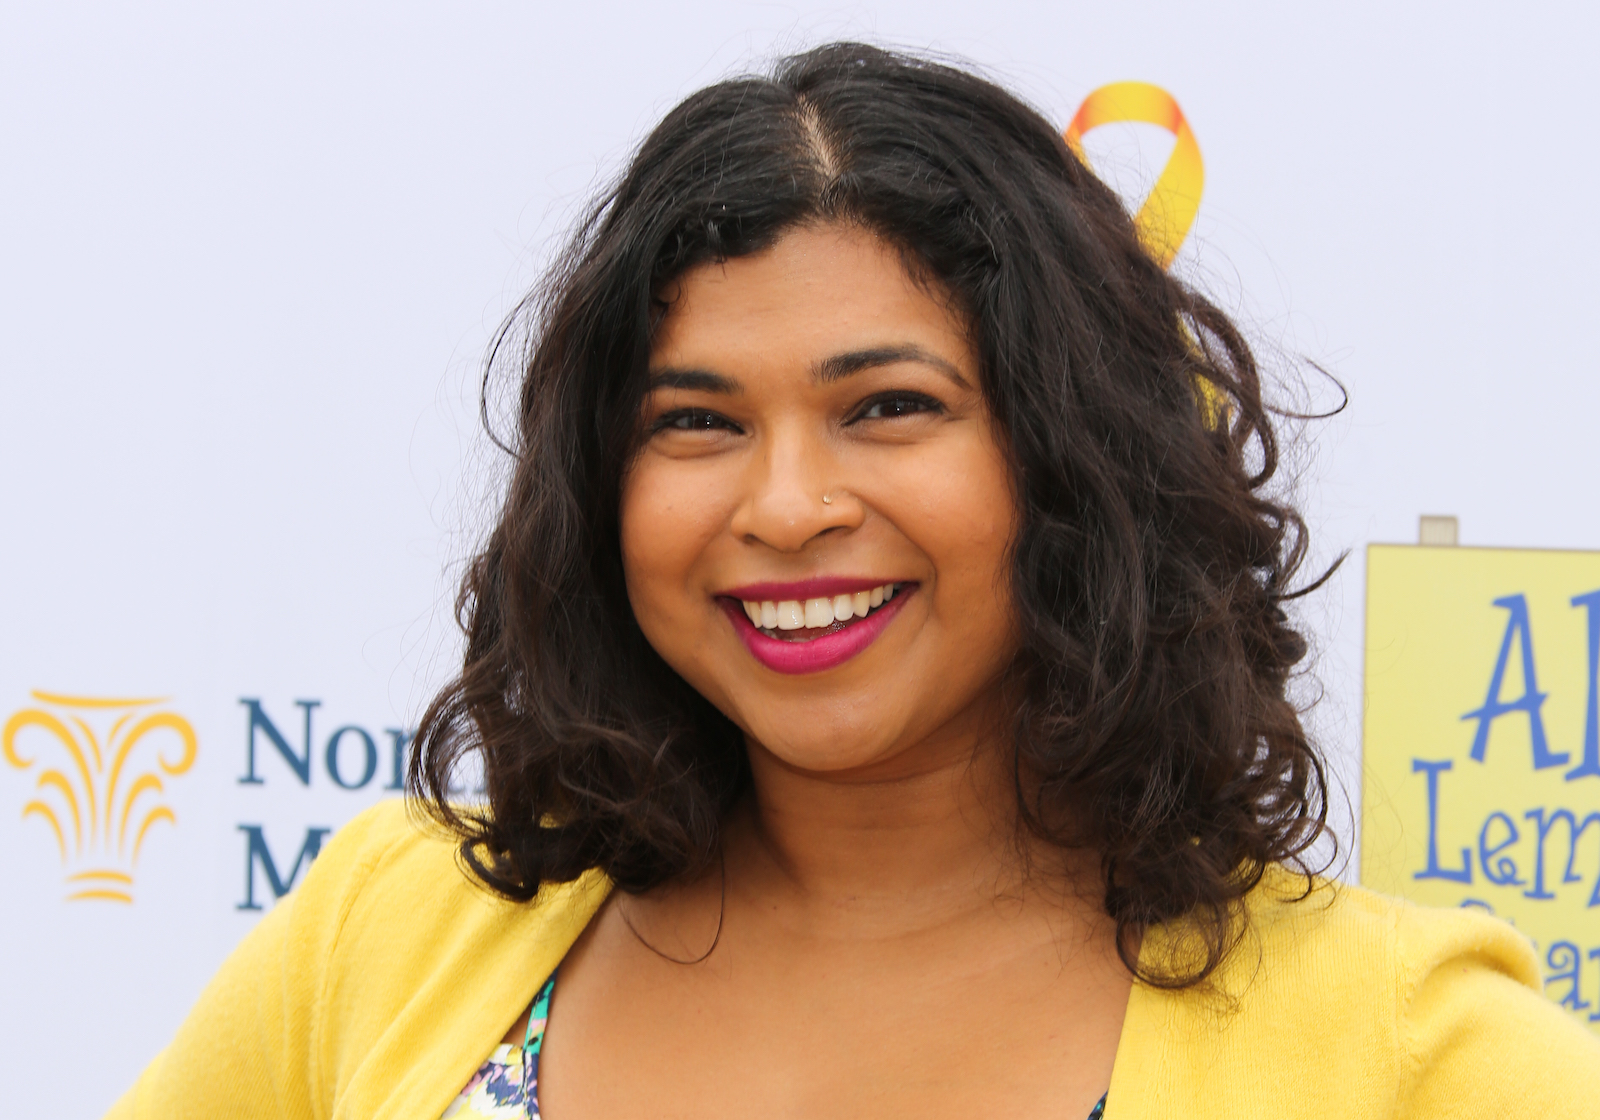 Food Network chef Aarti Sequeira offers tips on how to make Thanksgiving 2021 a success